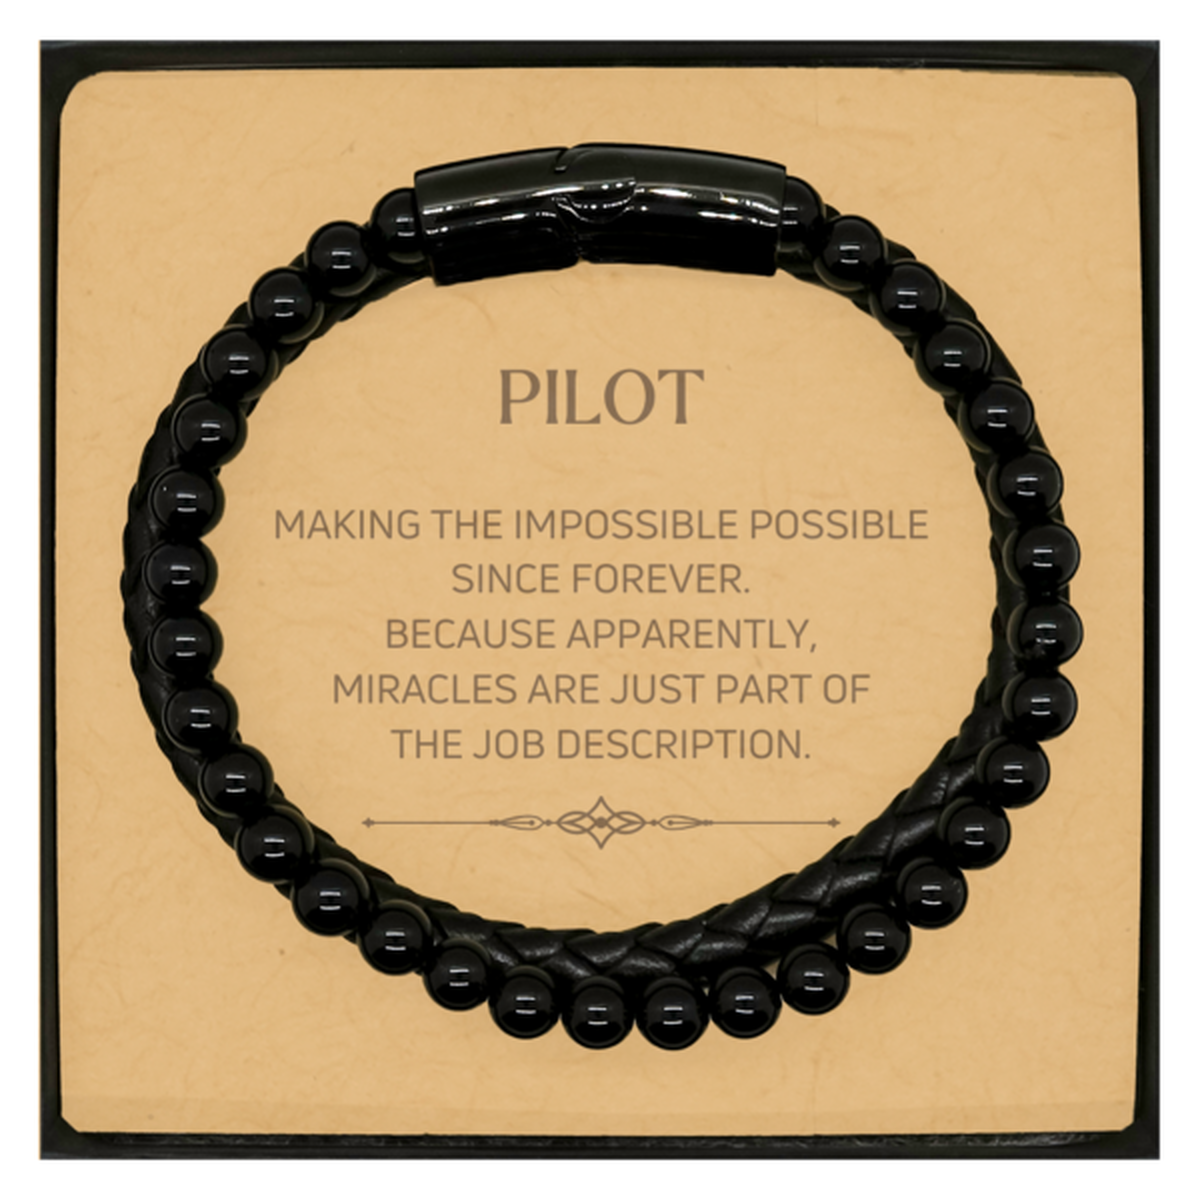 Funny Pilot Gifts, Miracles are just part of the job description, Inspirational Birthday Christmas Stone Leather Bracelets For Pilot, Men, Women, Coworkers, Friends, Boss